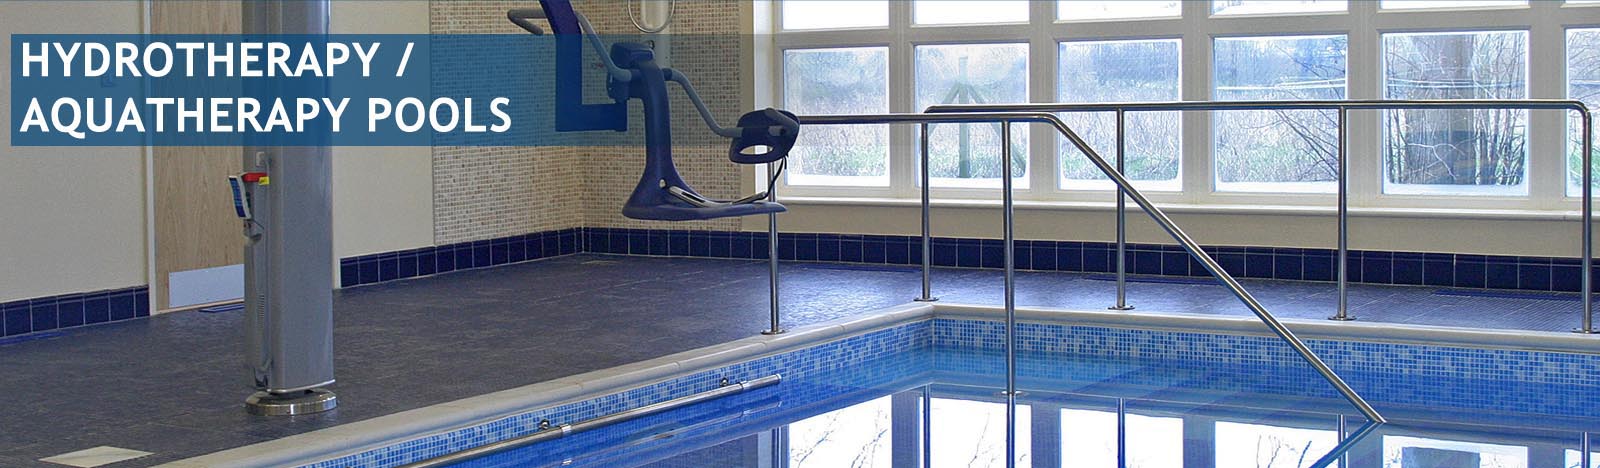 hydrotherapy pools specialists manchester